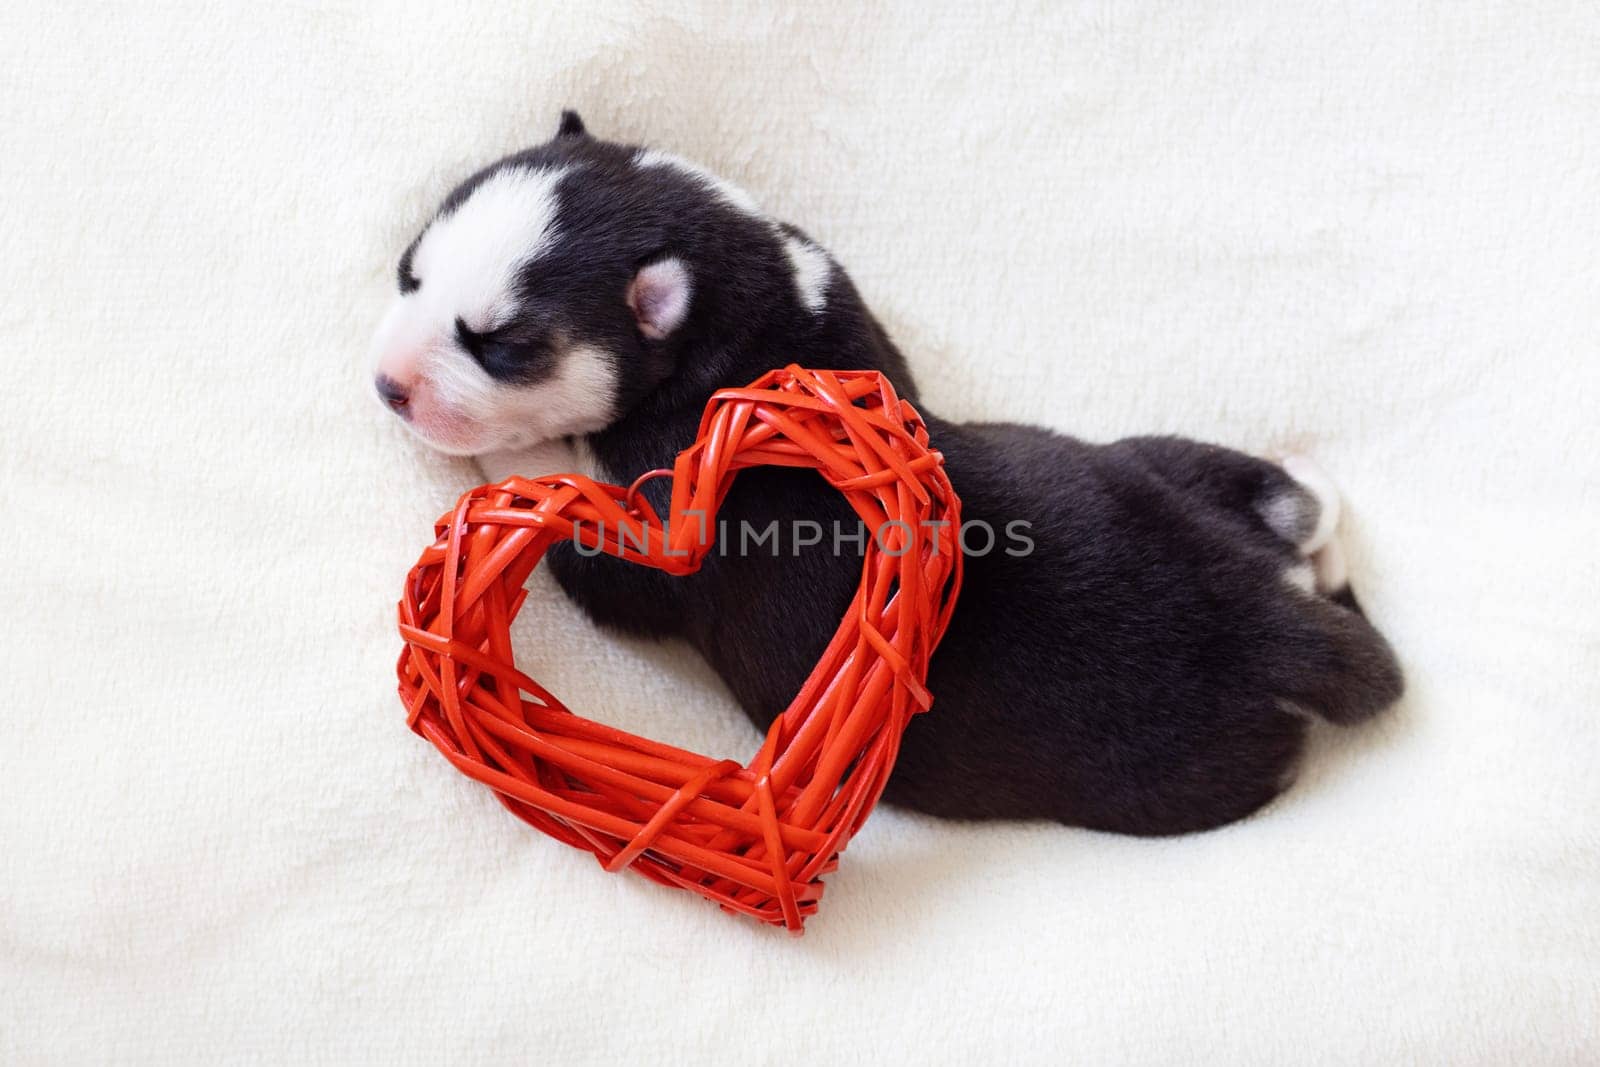 Cute siberian husky puppy sleeps with red heart on a white fluffy background by andreyz